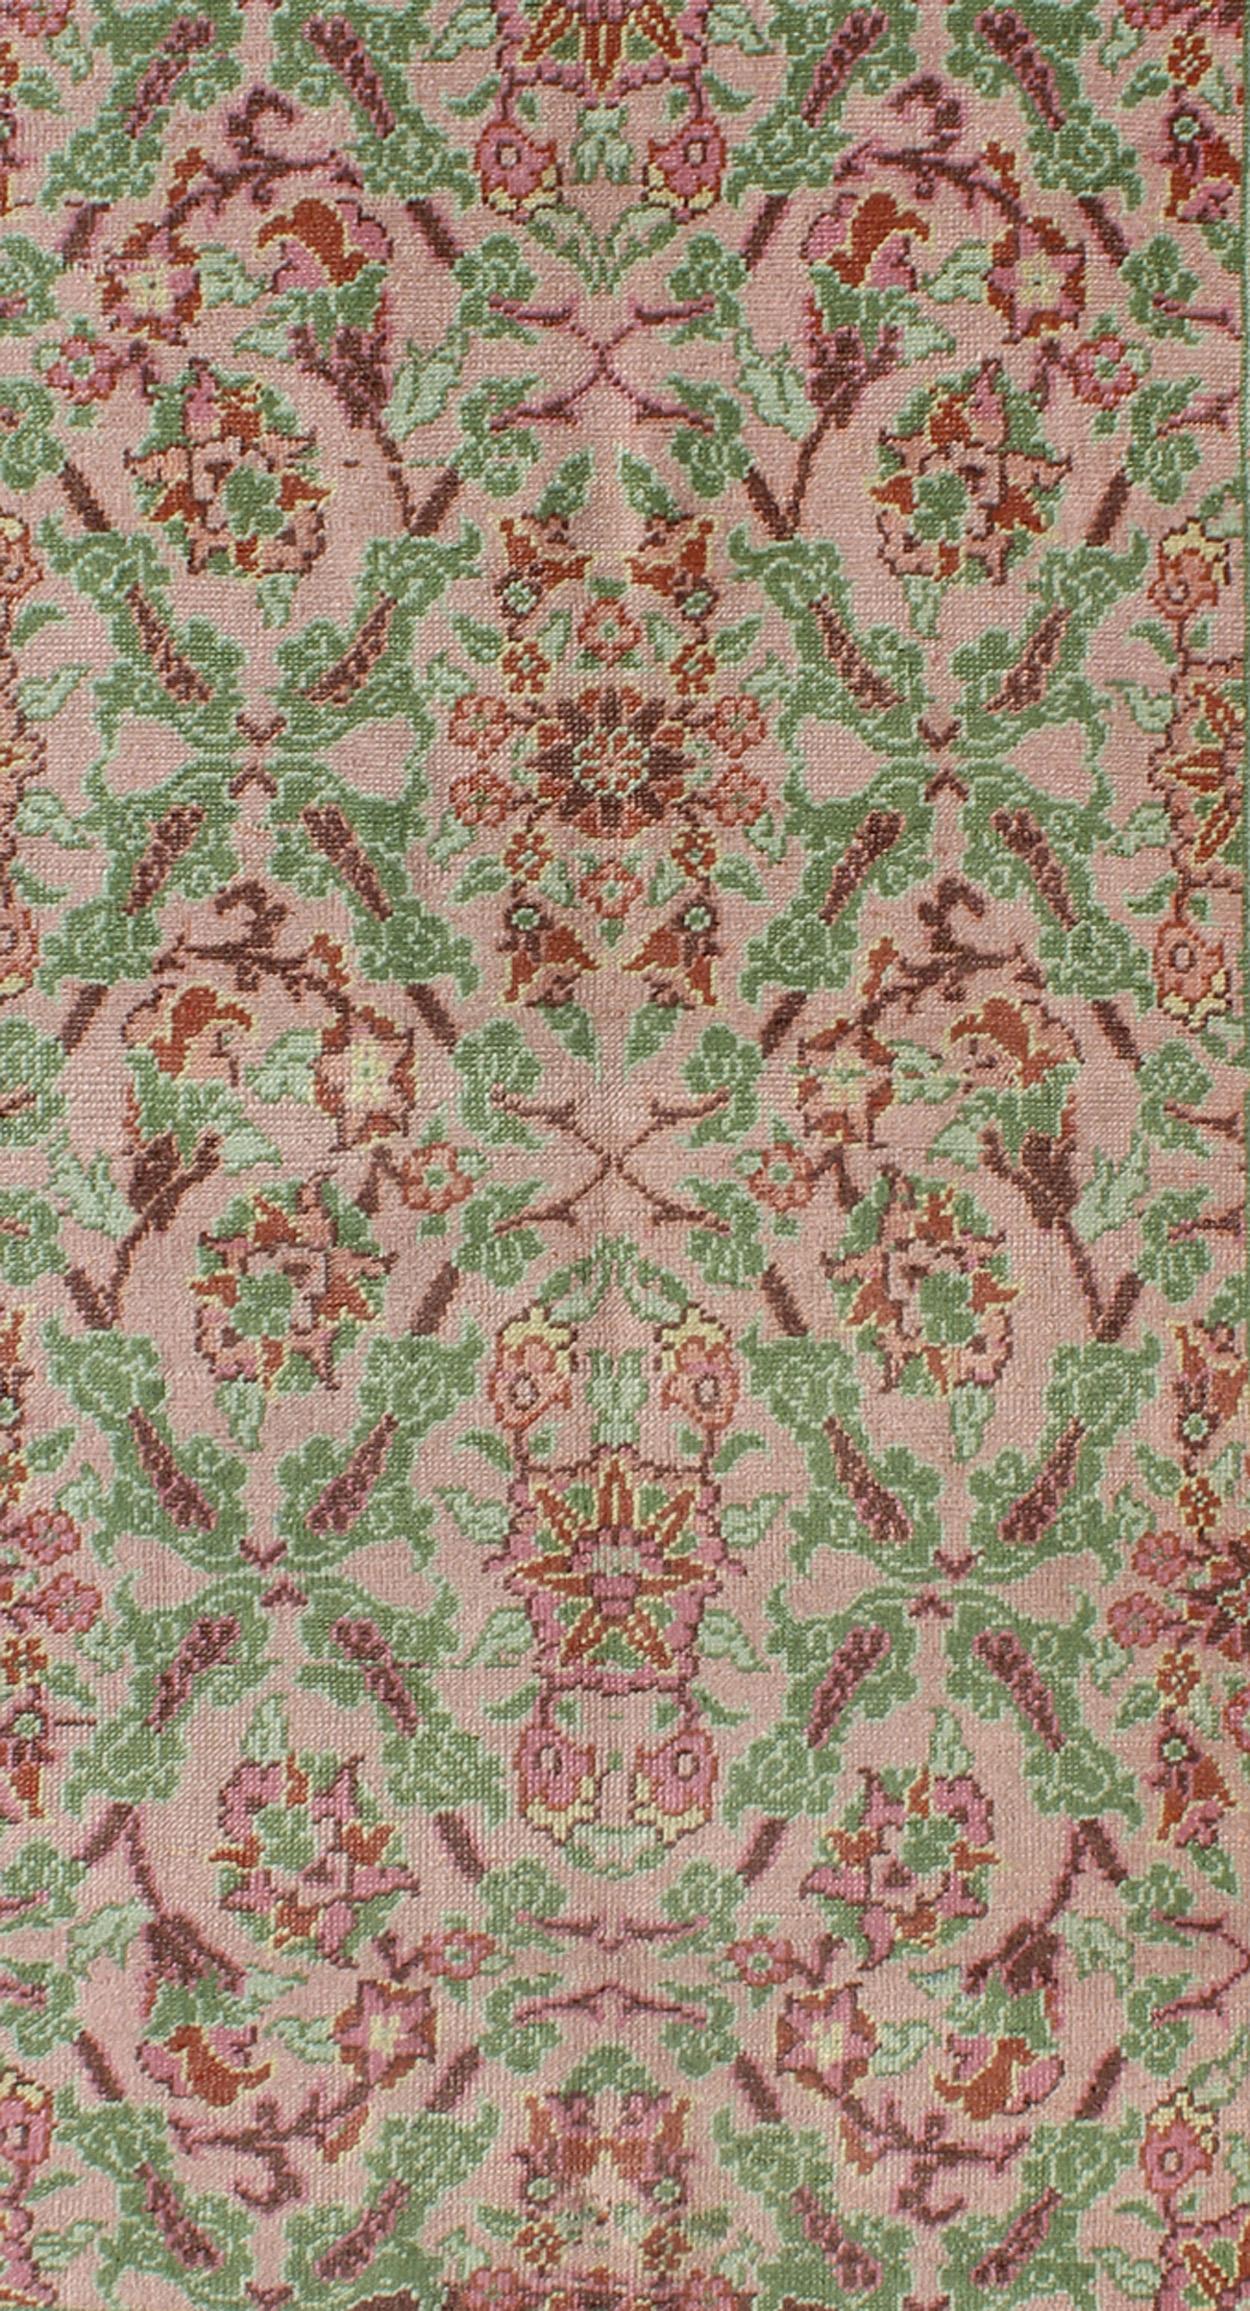 Pink, Rose, and Green Floral Design Midcentury Vintage Turkish Oushak Area Rug In Good Condition For Sale In Atlanta, GA